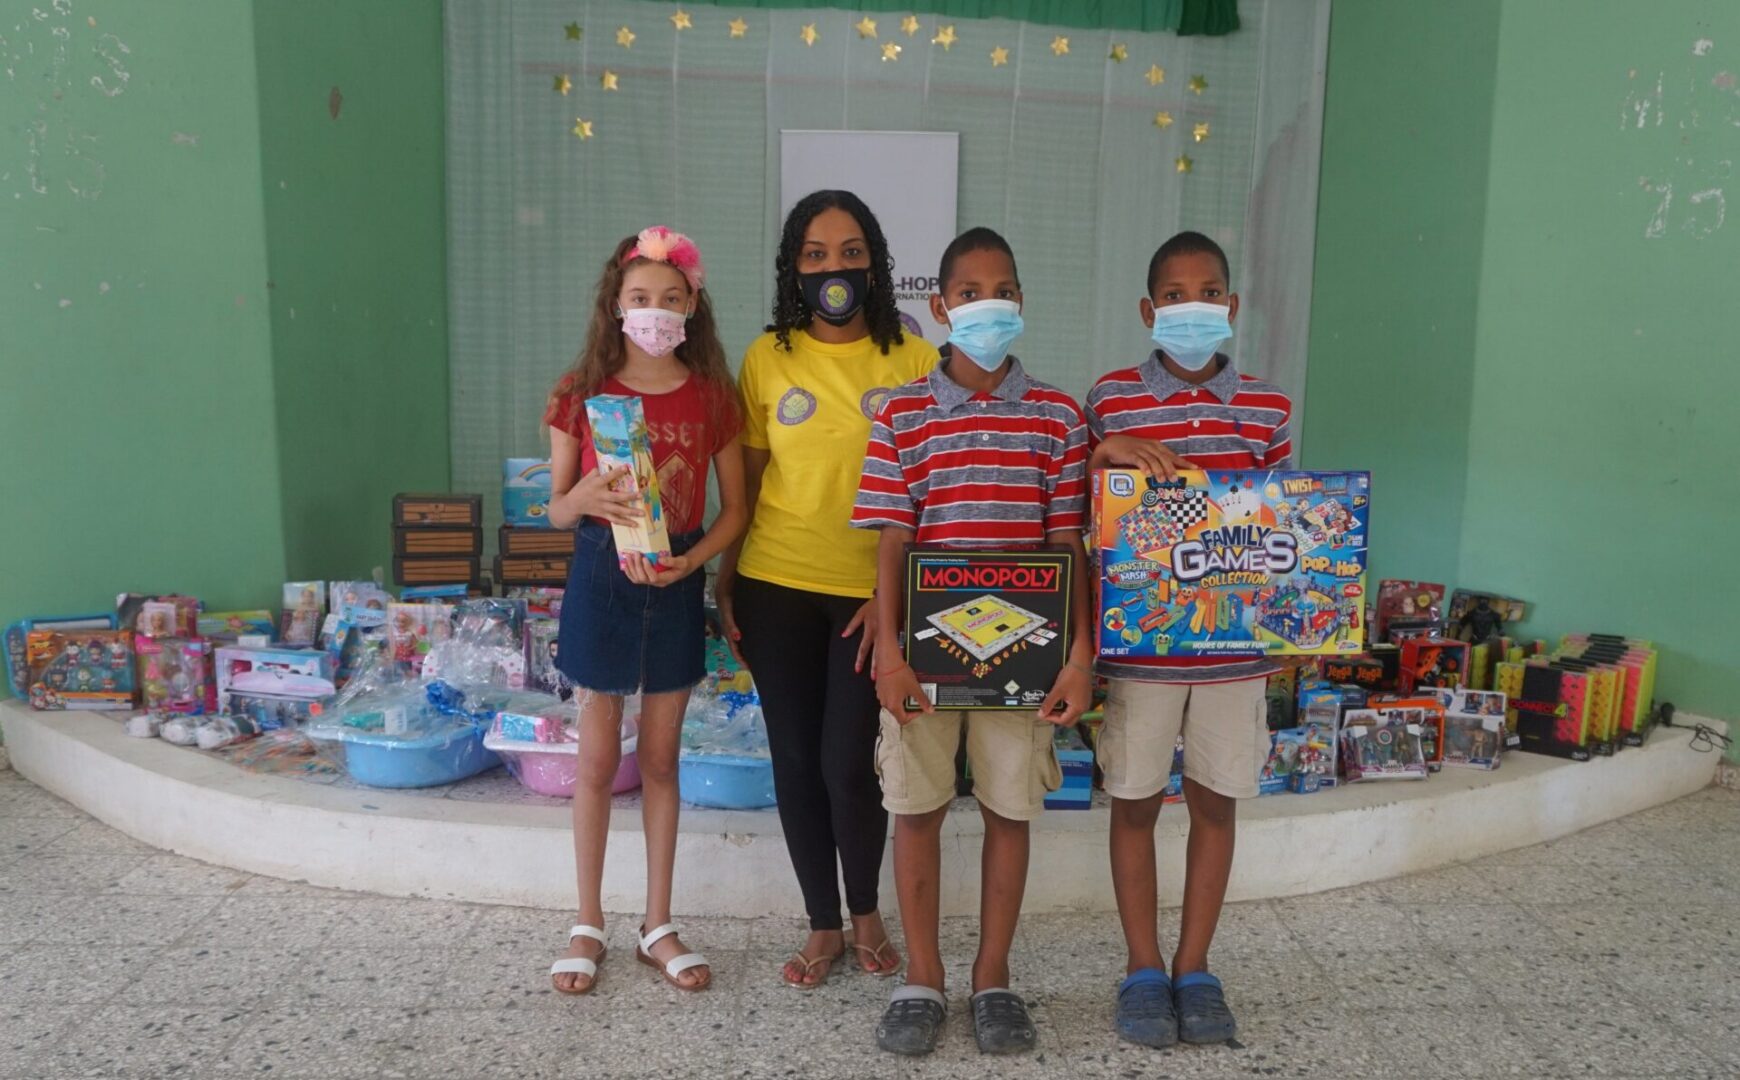 Our staff, a girl, and twin boys, the children holding boxes of toys